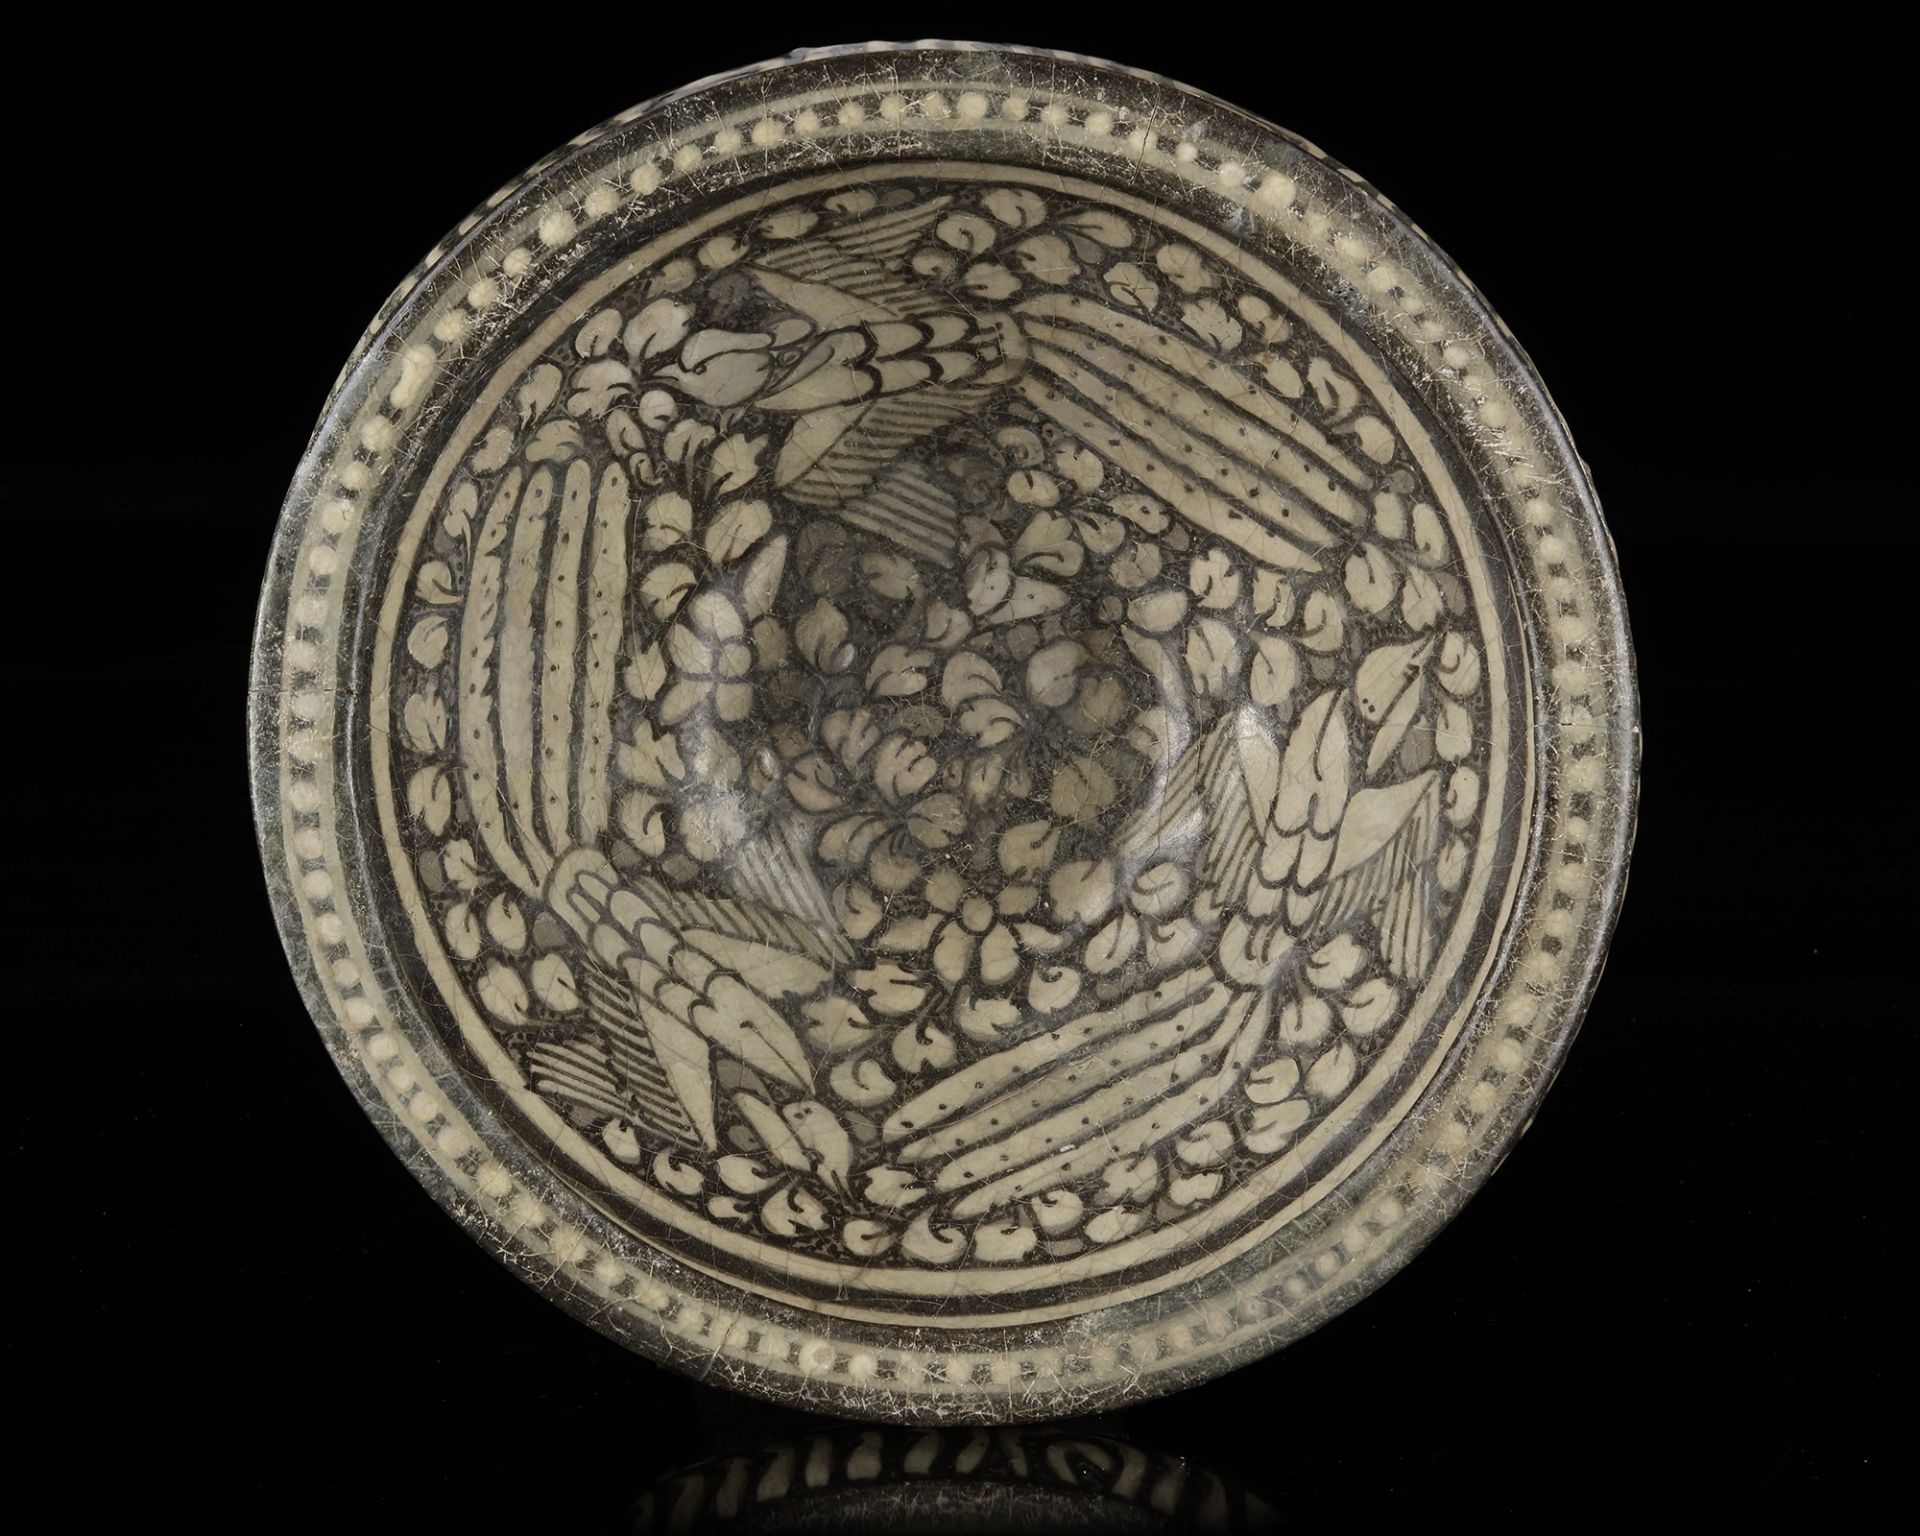 A BOWL DECORATED WITH THREE BIRDS IN FLIGHT, SULTANABAD, 13TH-14TH CENTURY